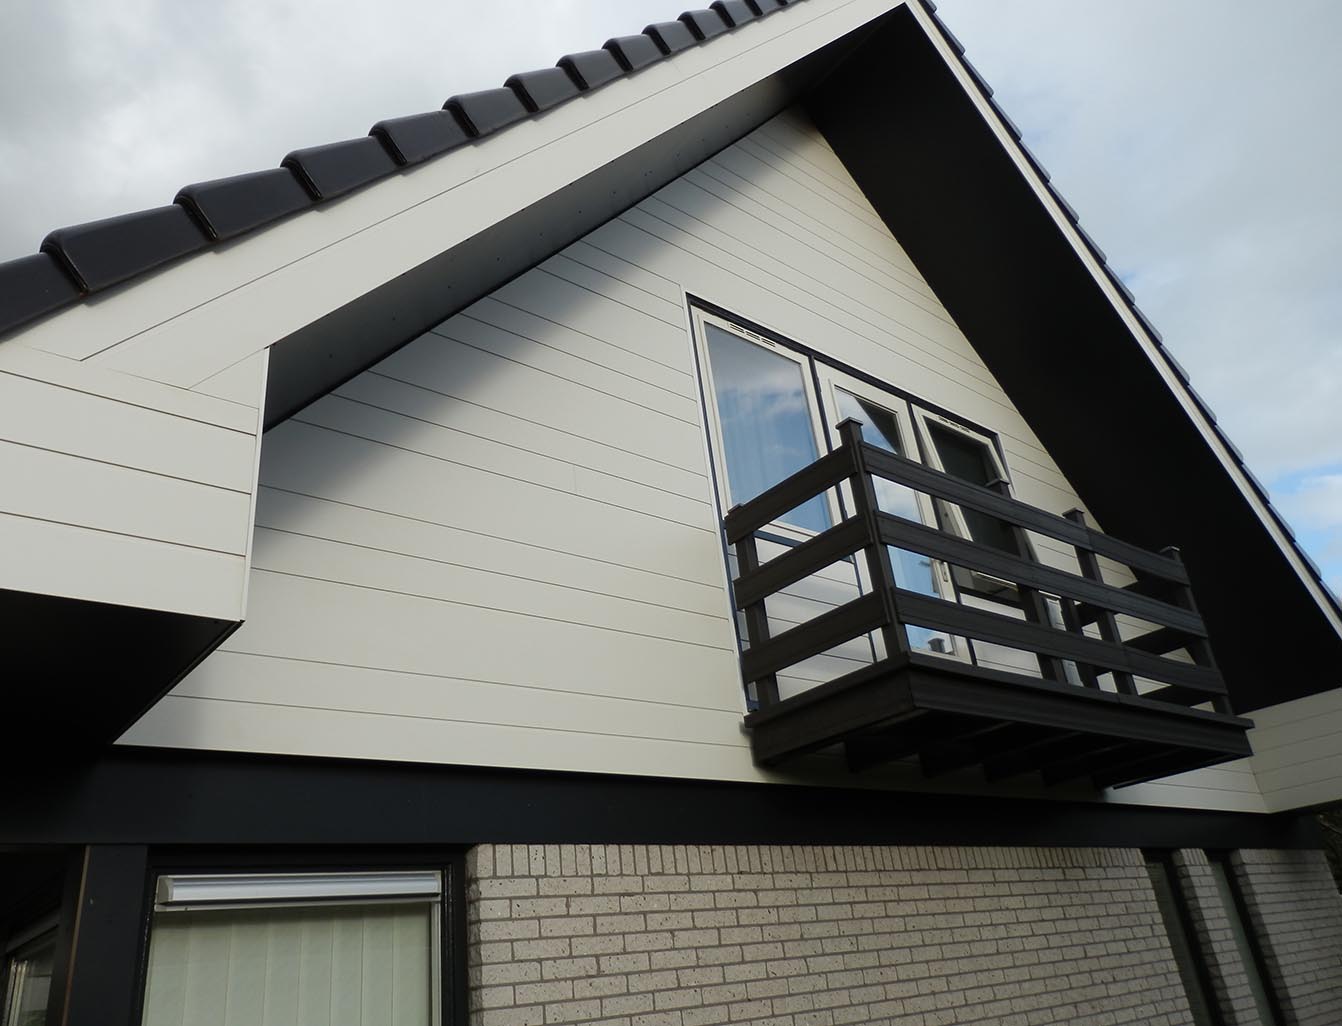 Rockpanel Exterior Cladding - Tongue & Groove (Rockpanel Lines²)